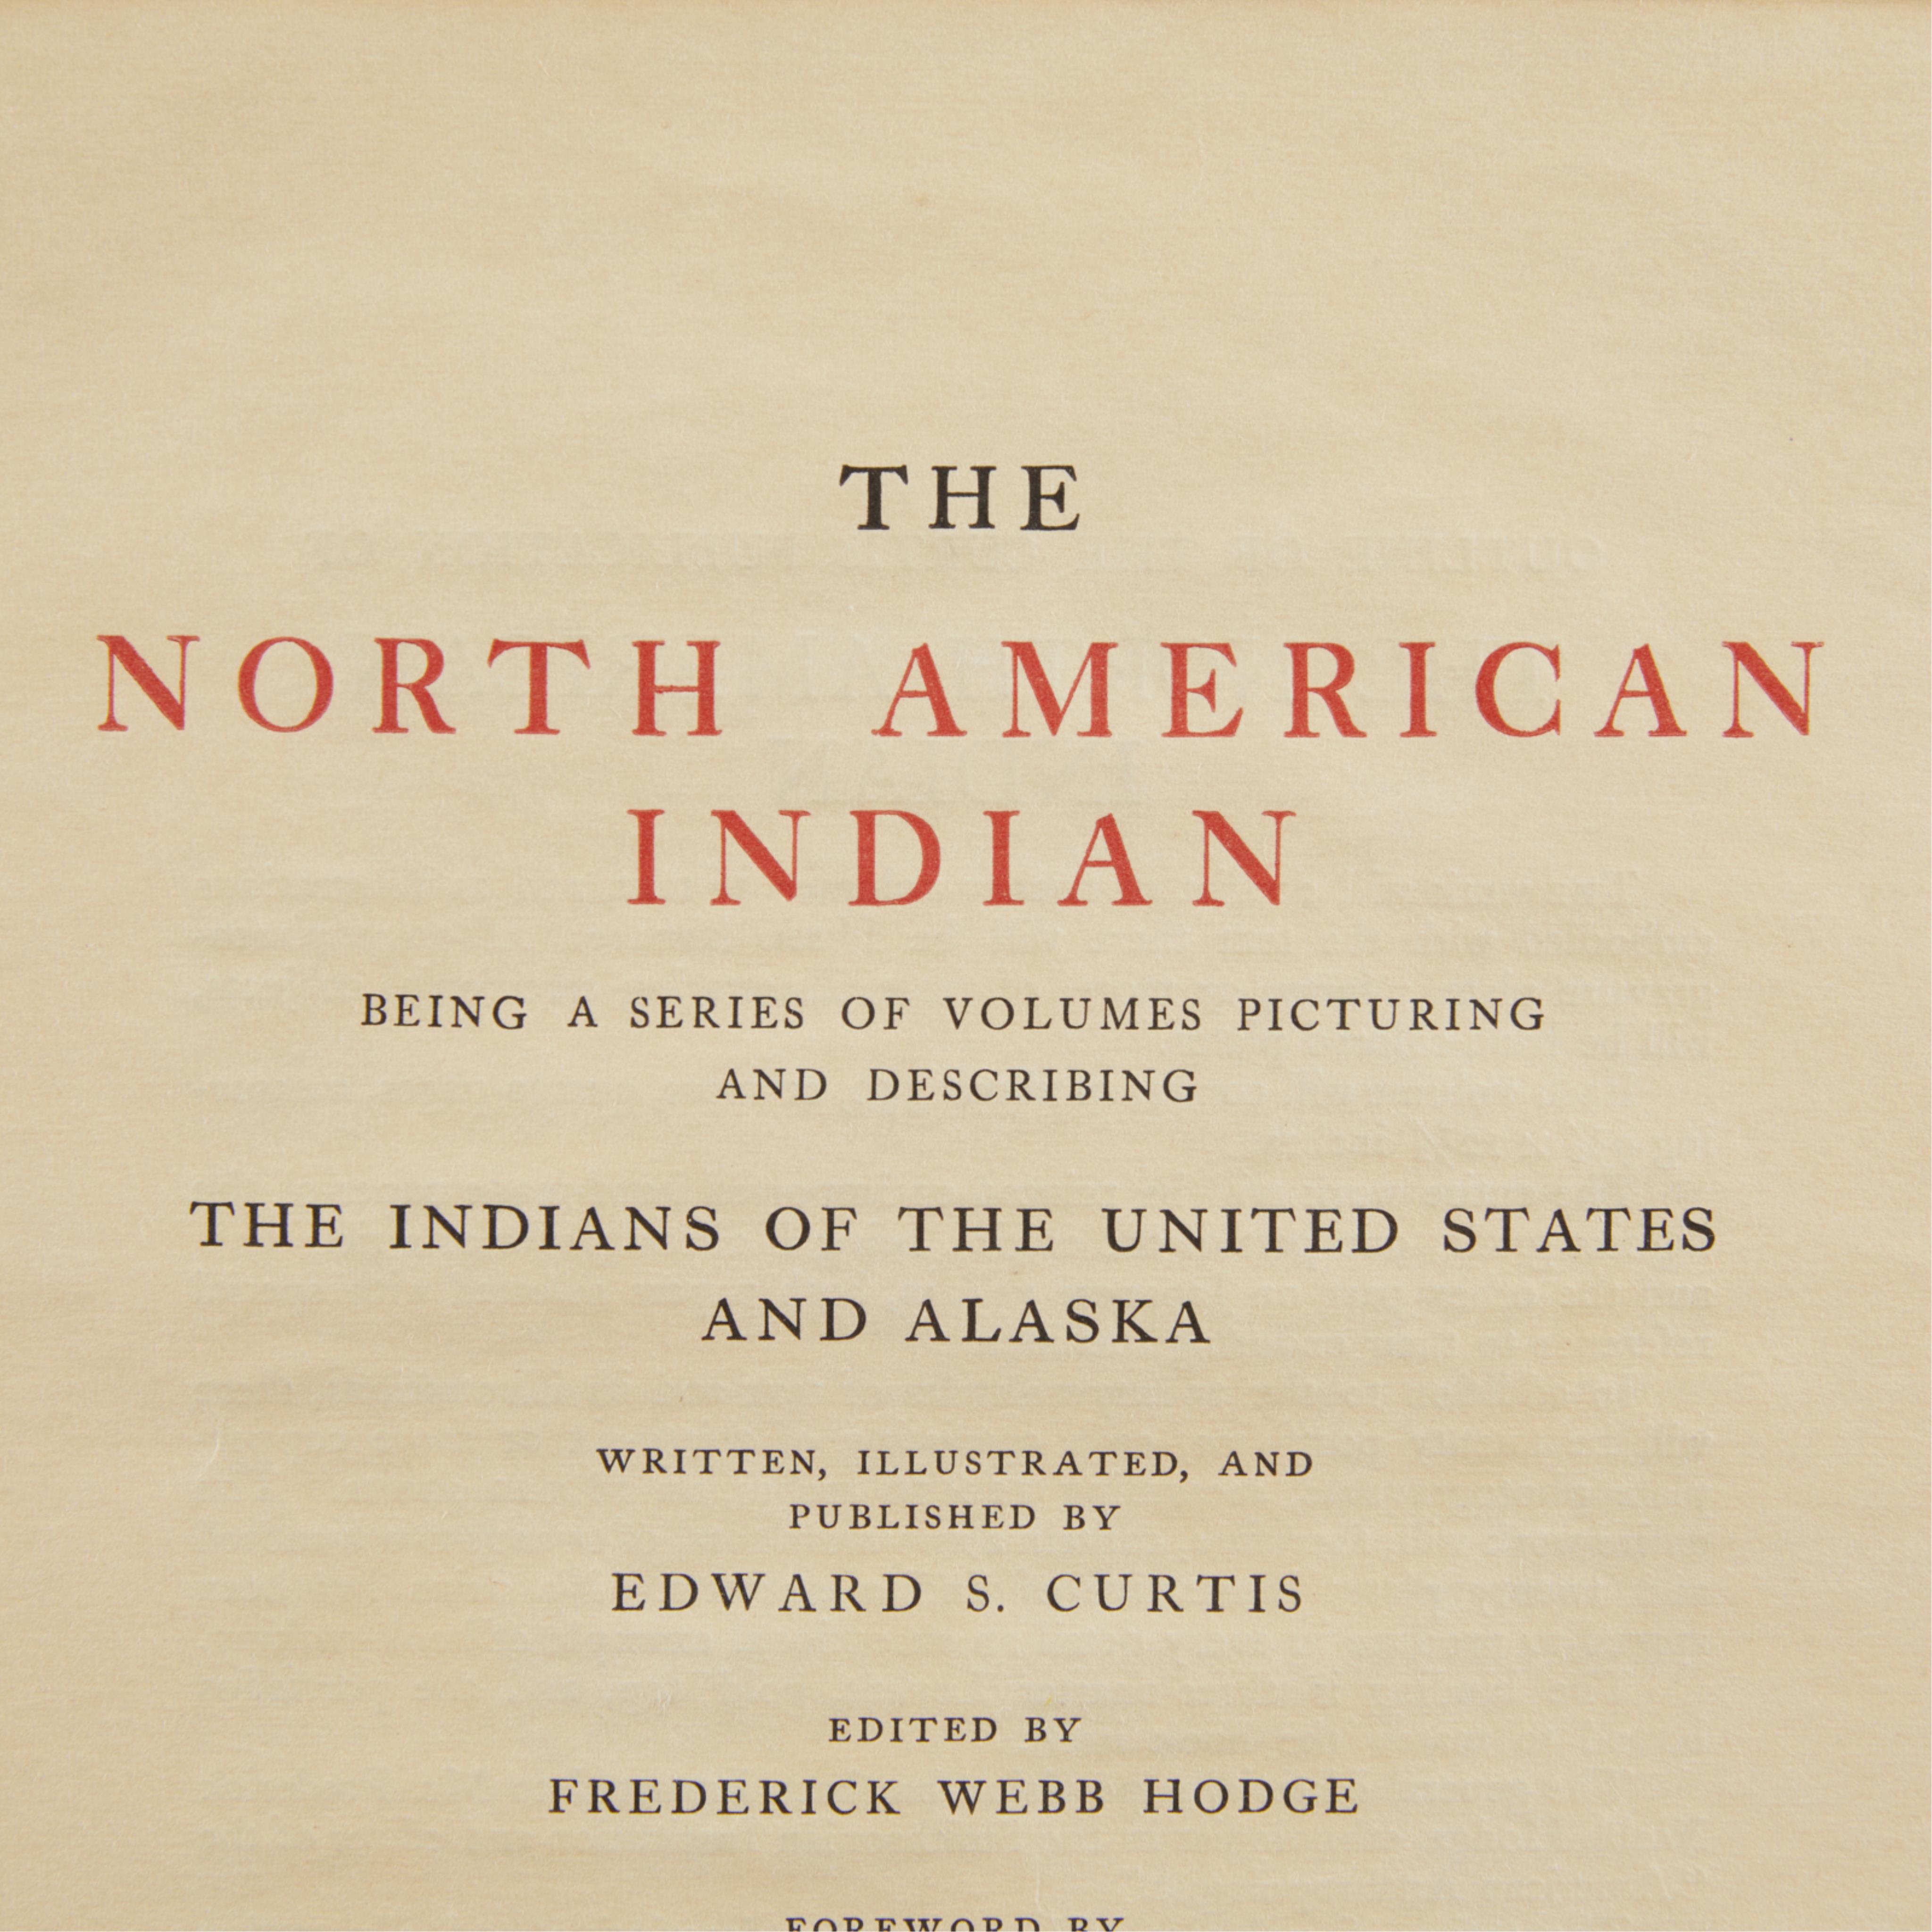 "The N. American Indian" Sample Signed Roosevelt - Image 9 of 11